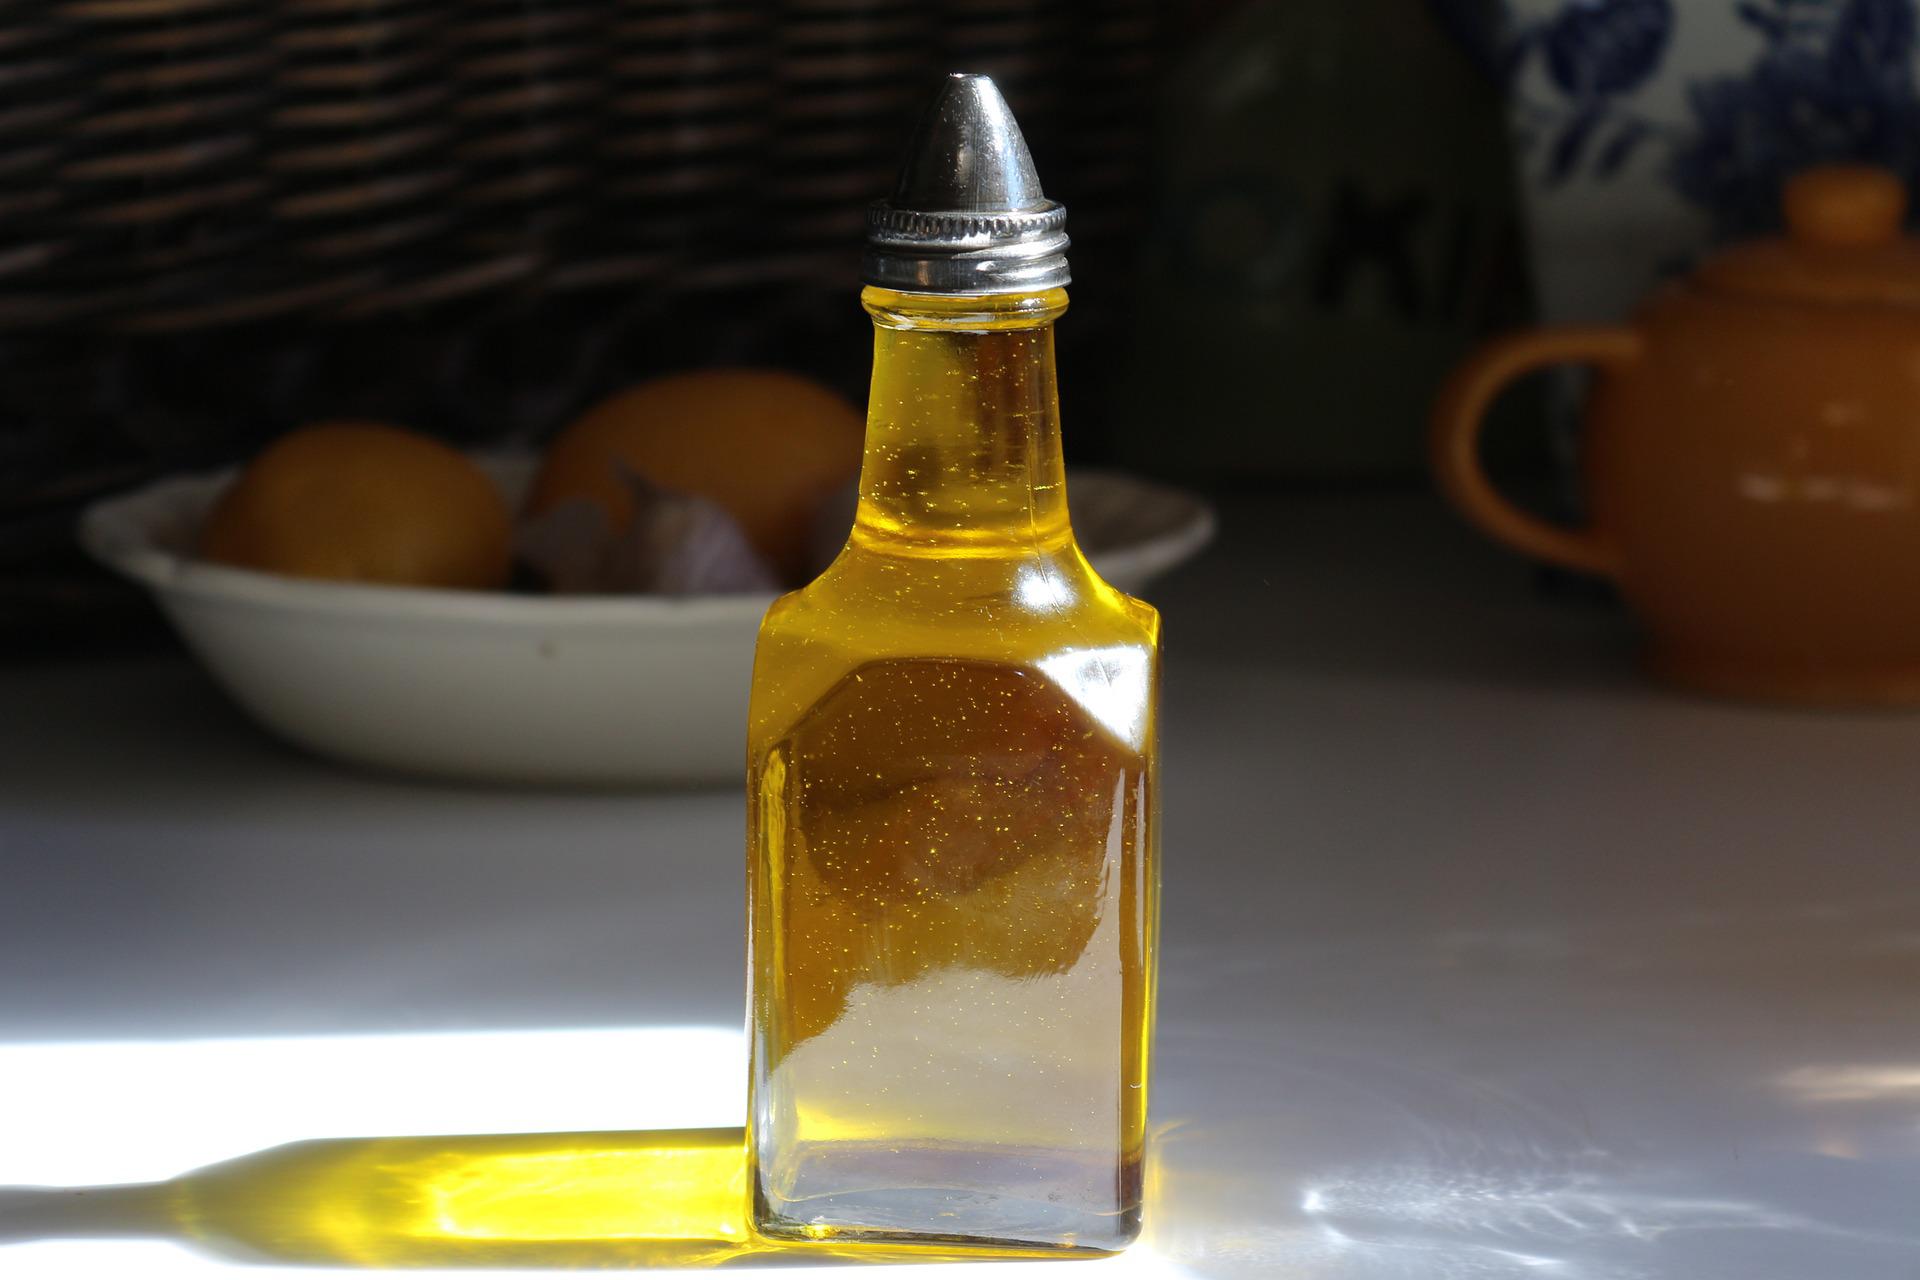 Do I Dispose Of Olive Oil Differently?